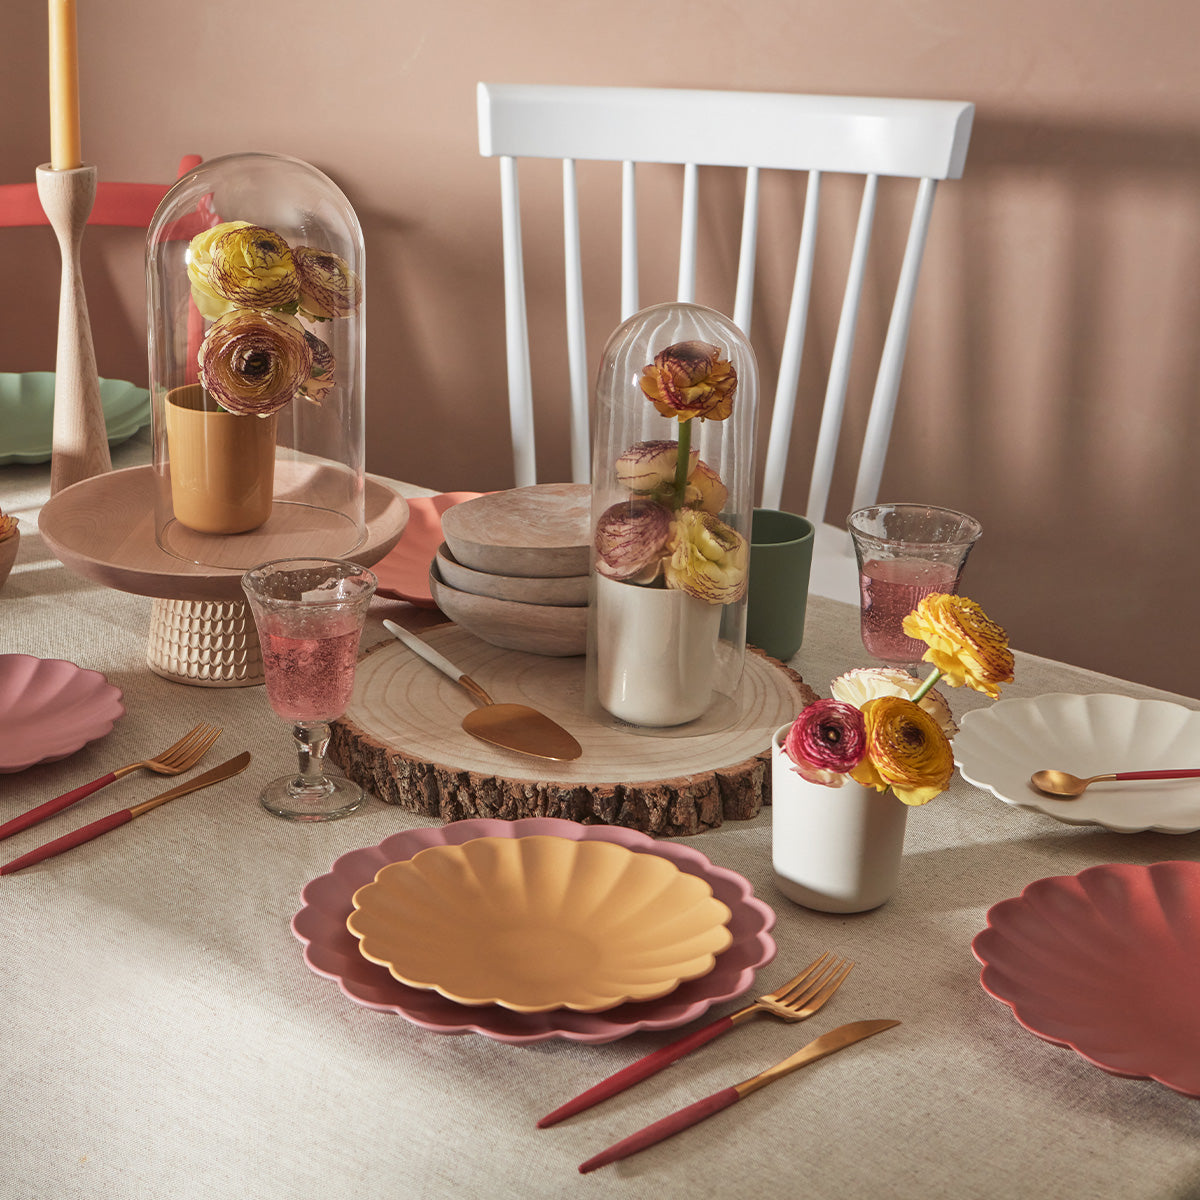 Our melamine plates and bamboo plates are reusable, and are the perfect party plates.